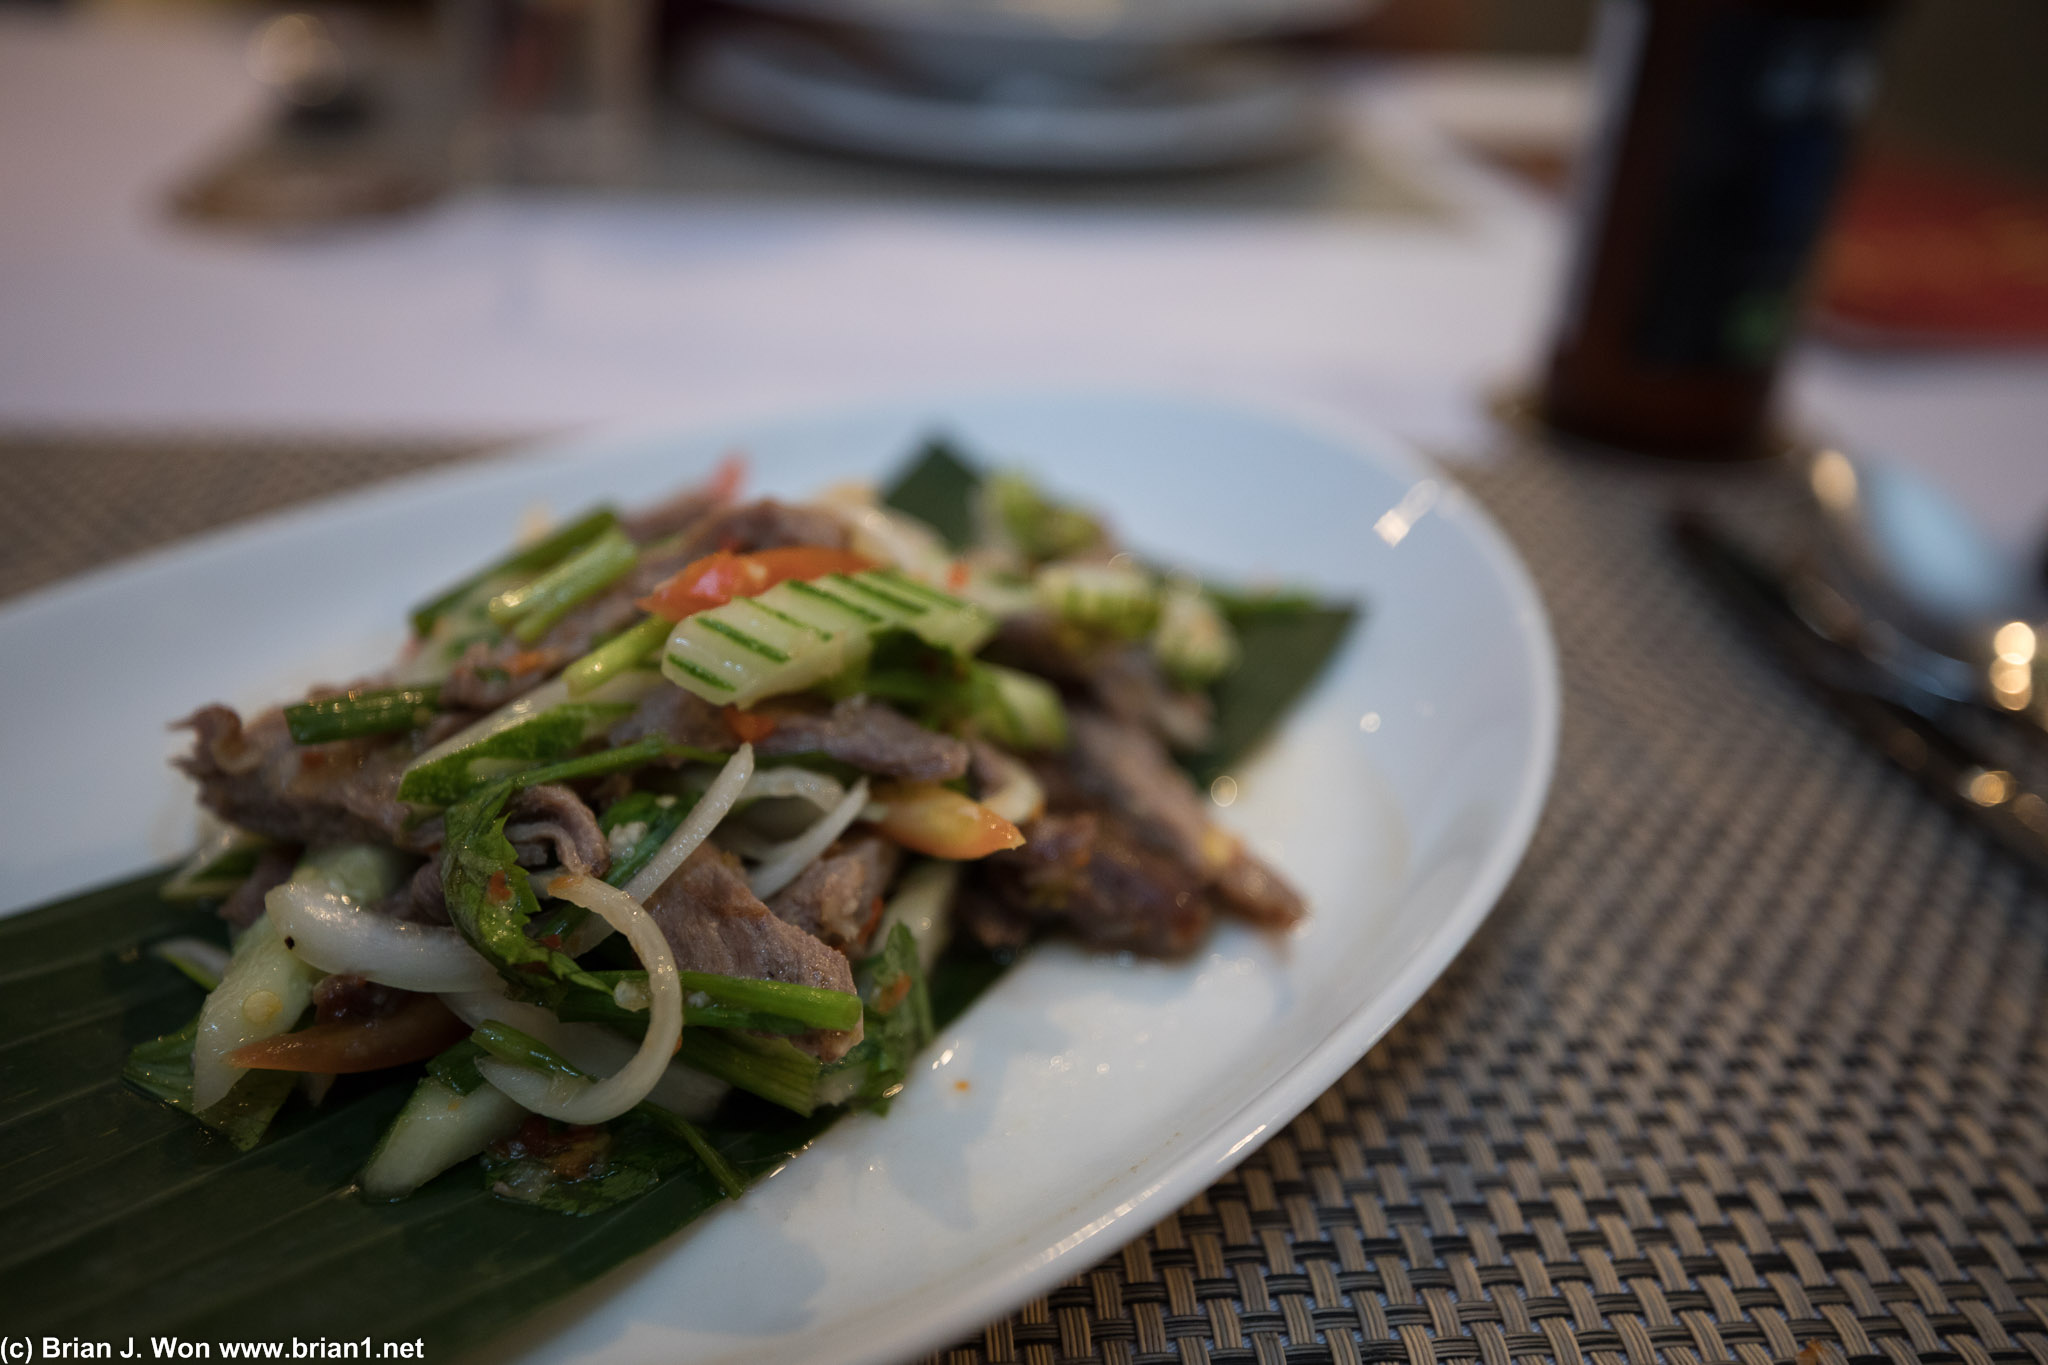 Thai beef salad. Typical for hotel food.